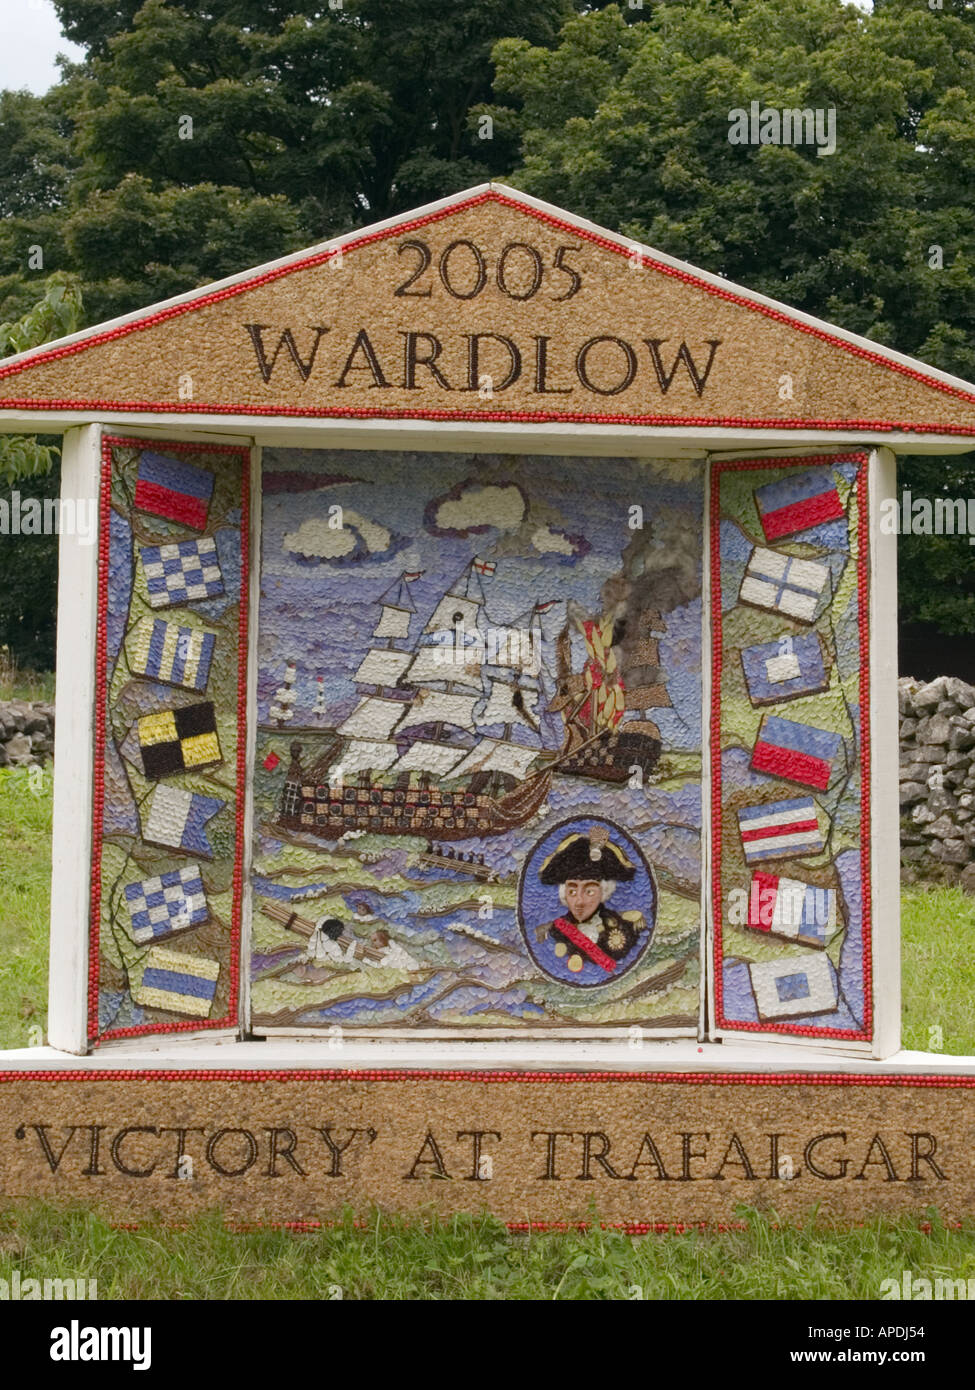 WELL DRESSING for 2005 with Victory at Trafalgar theme Wardlow Derbyshire England UK Stock Photo